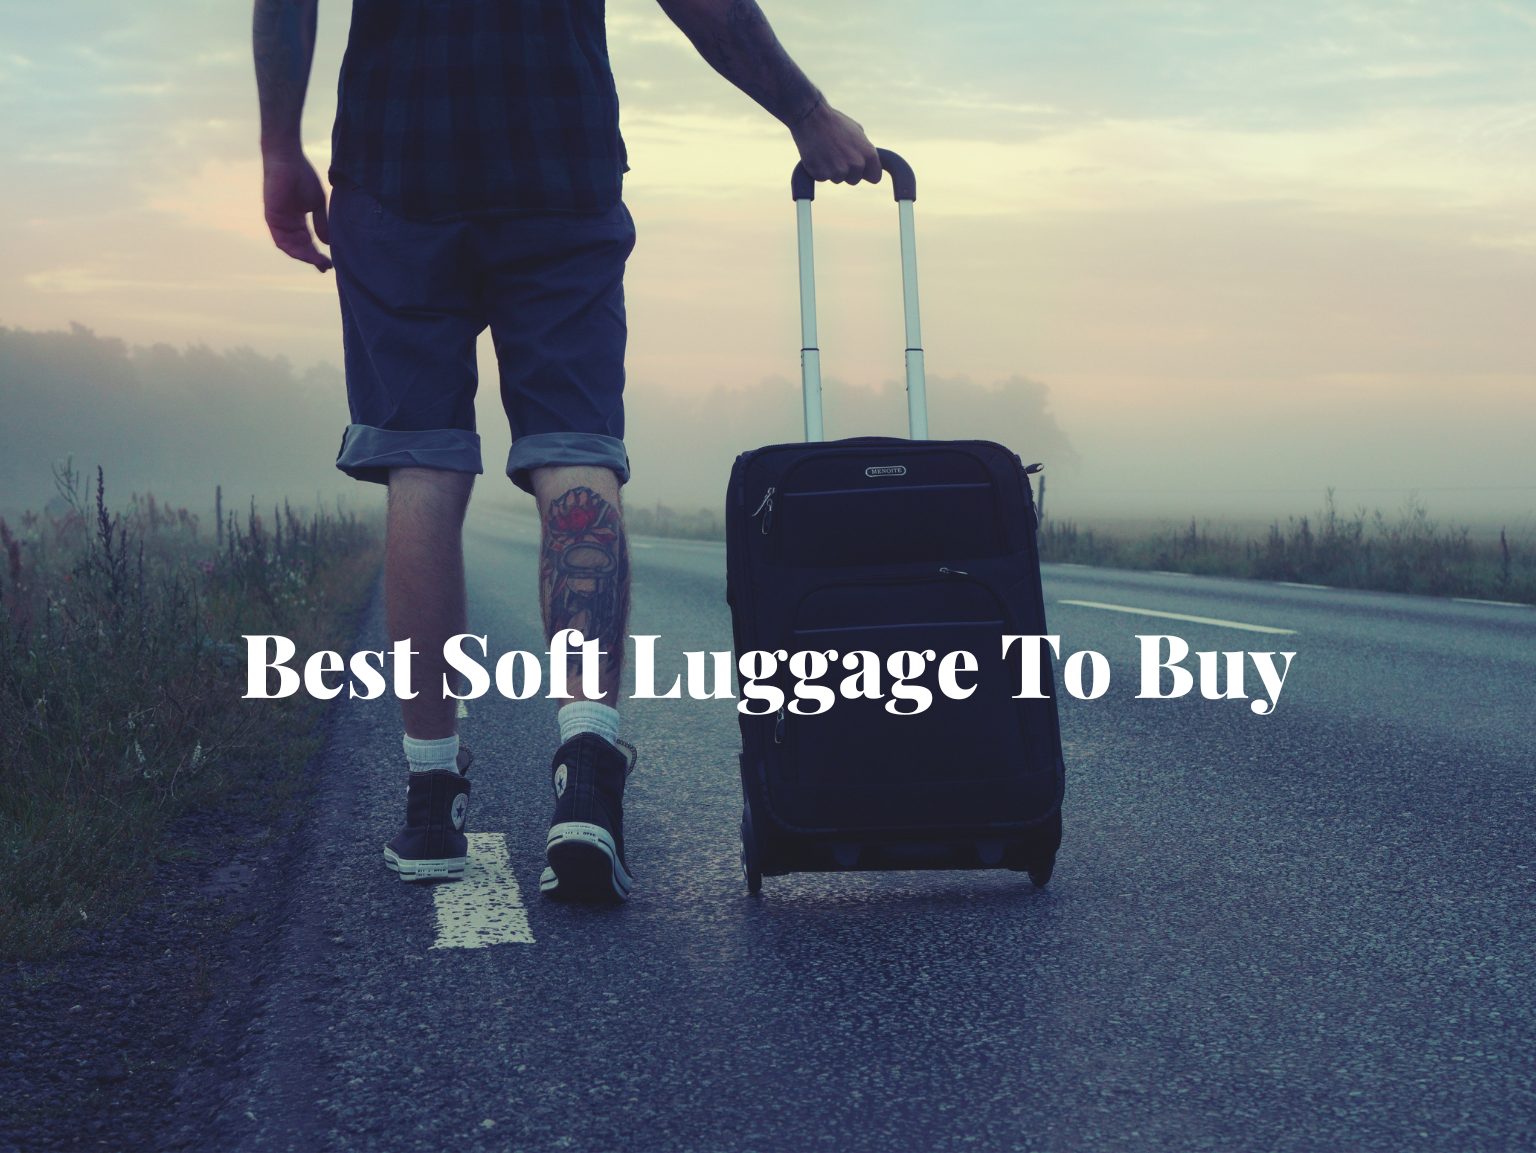 Best Soft Luggage To Buy